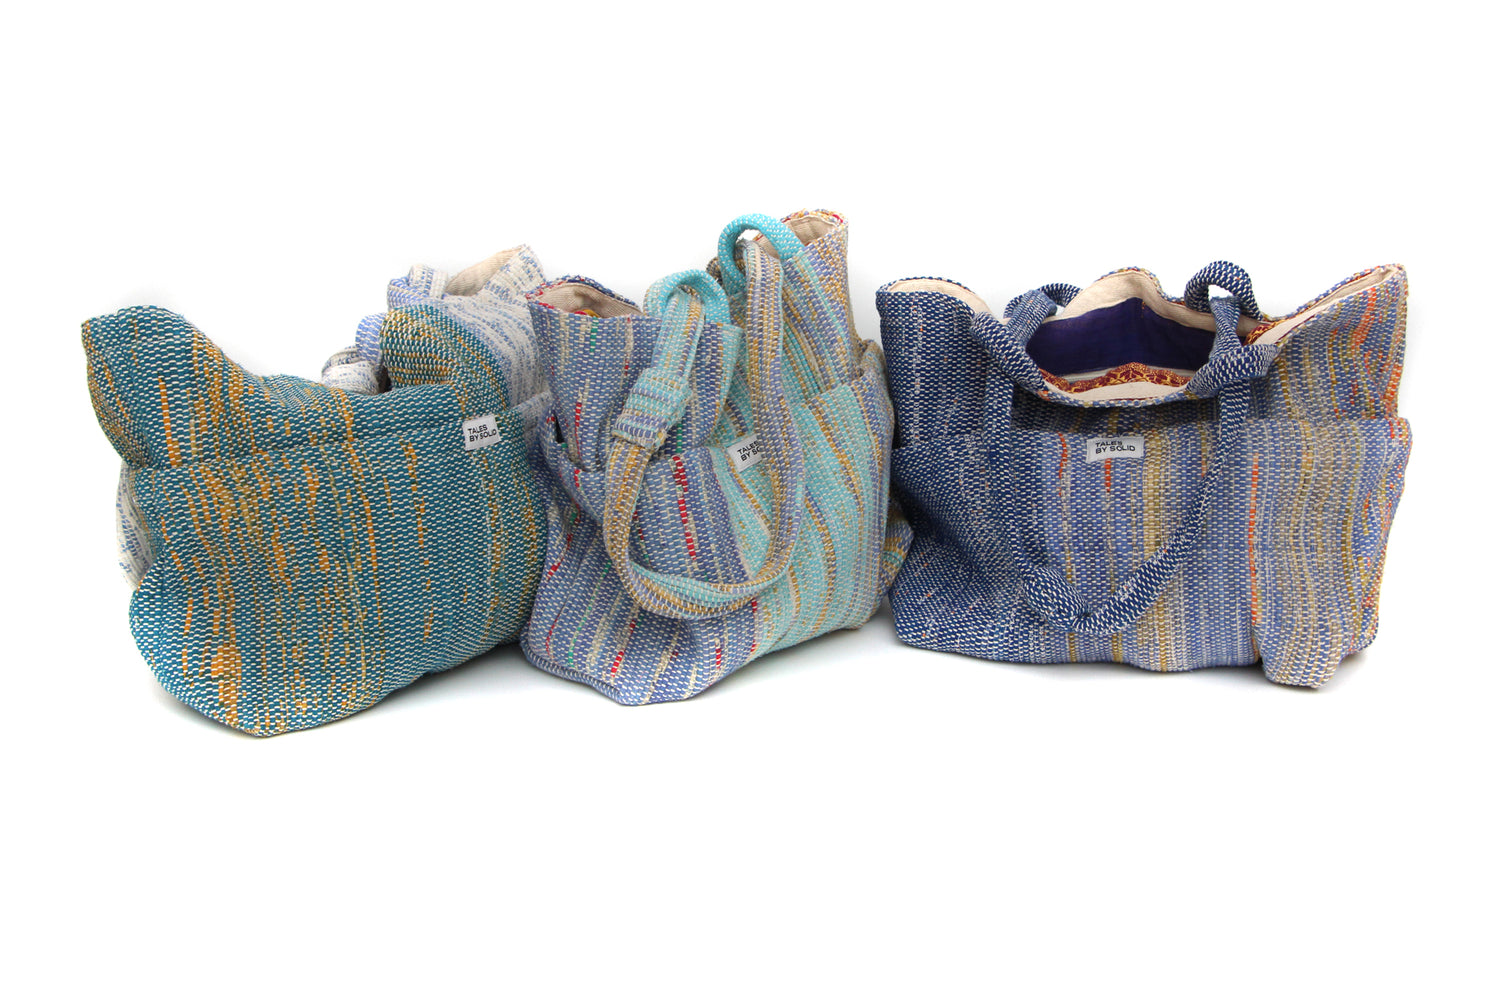 Small Sari Bag 01 - Handcrafted Elegance with a Sustainable Story